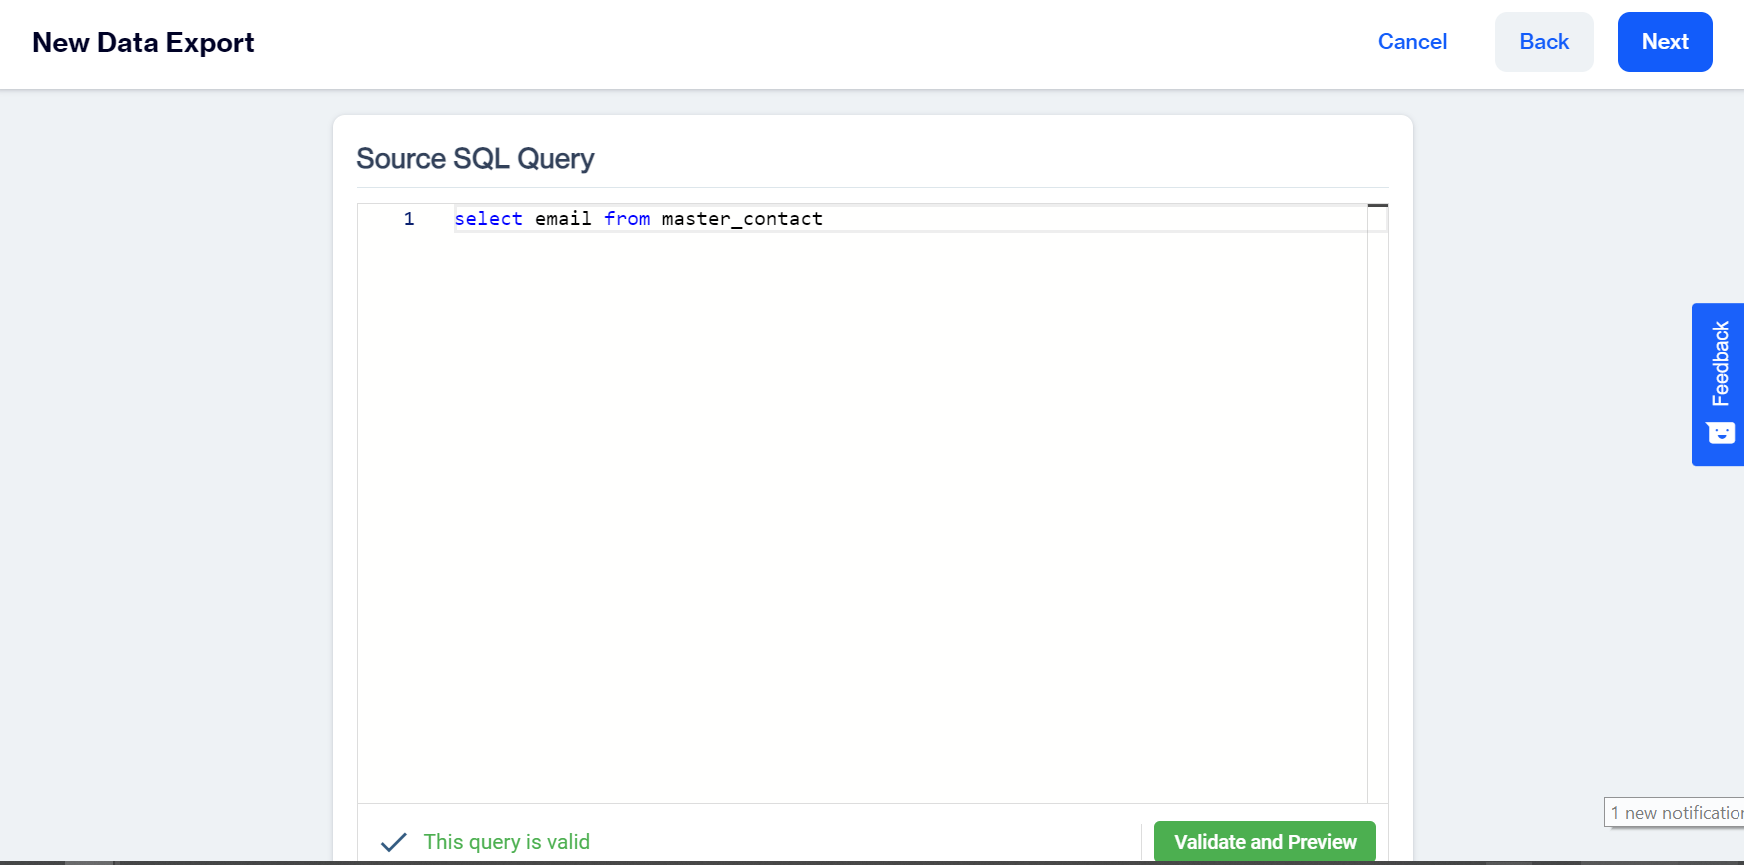 Source SQL Query